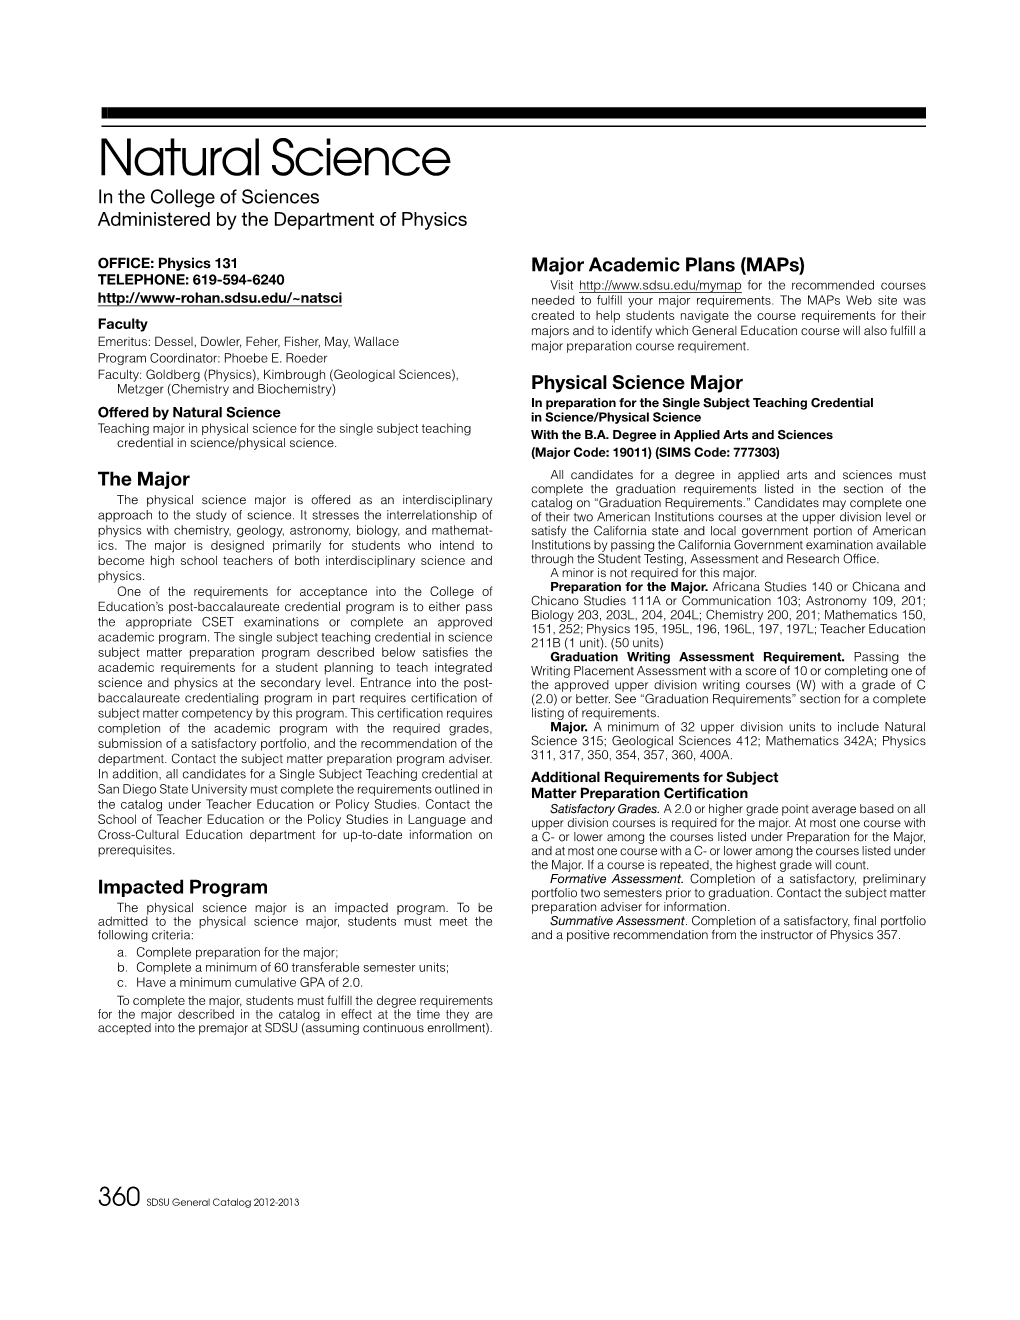 Natural Science in the College of Sciences Administered by the Department of Physics